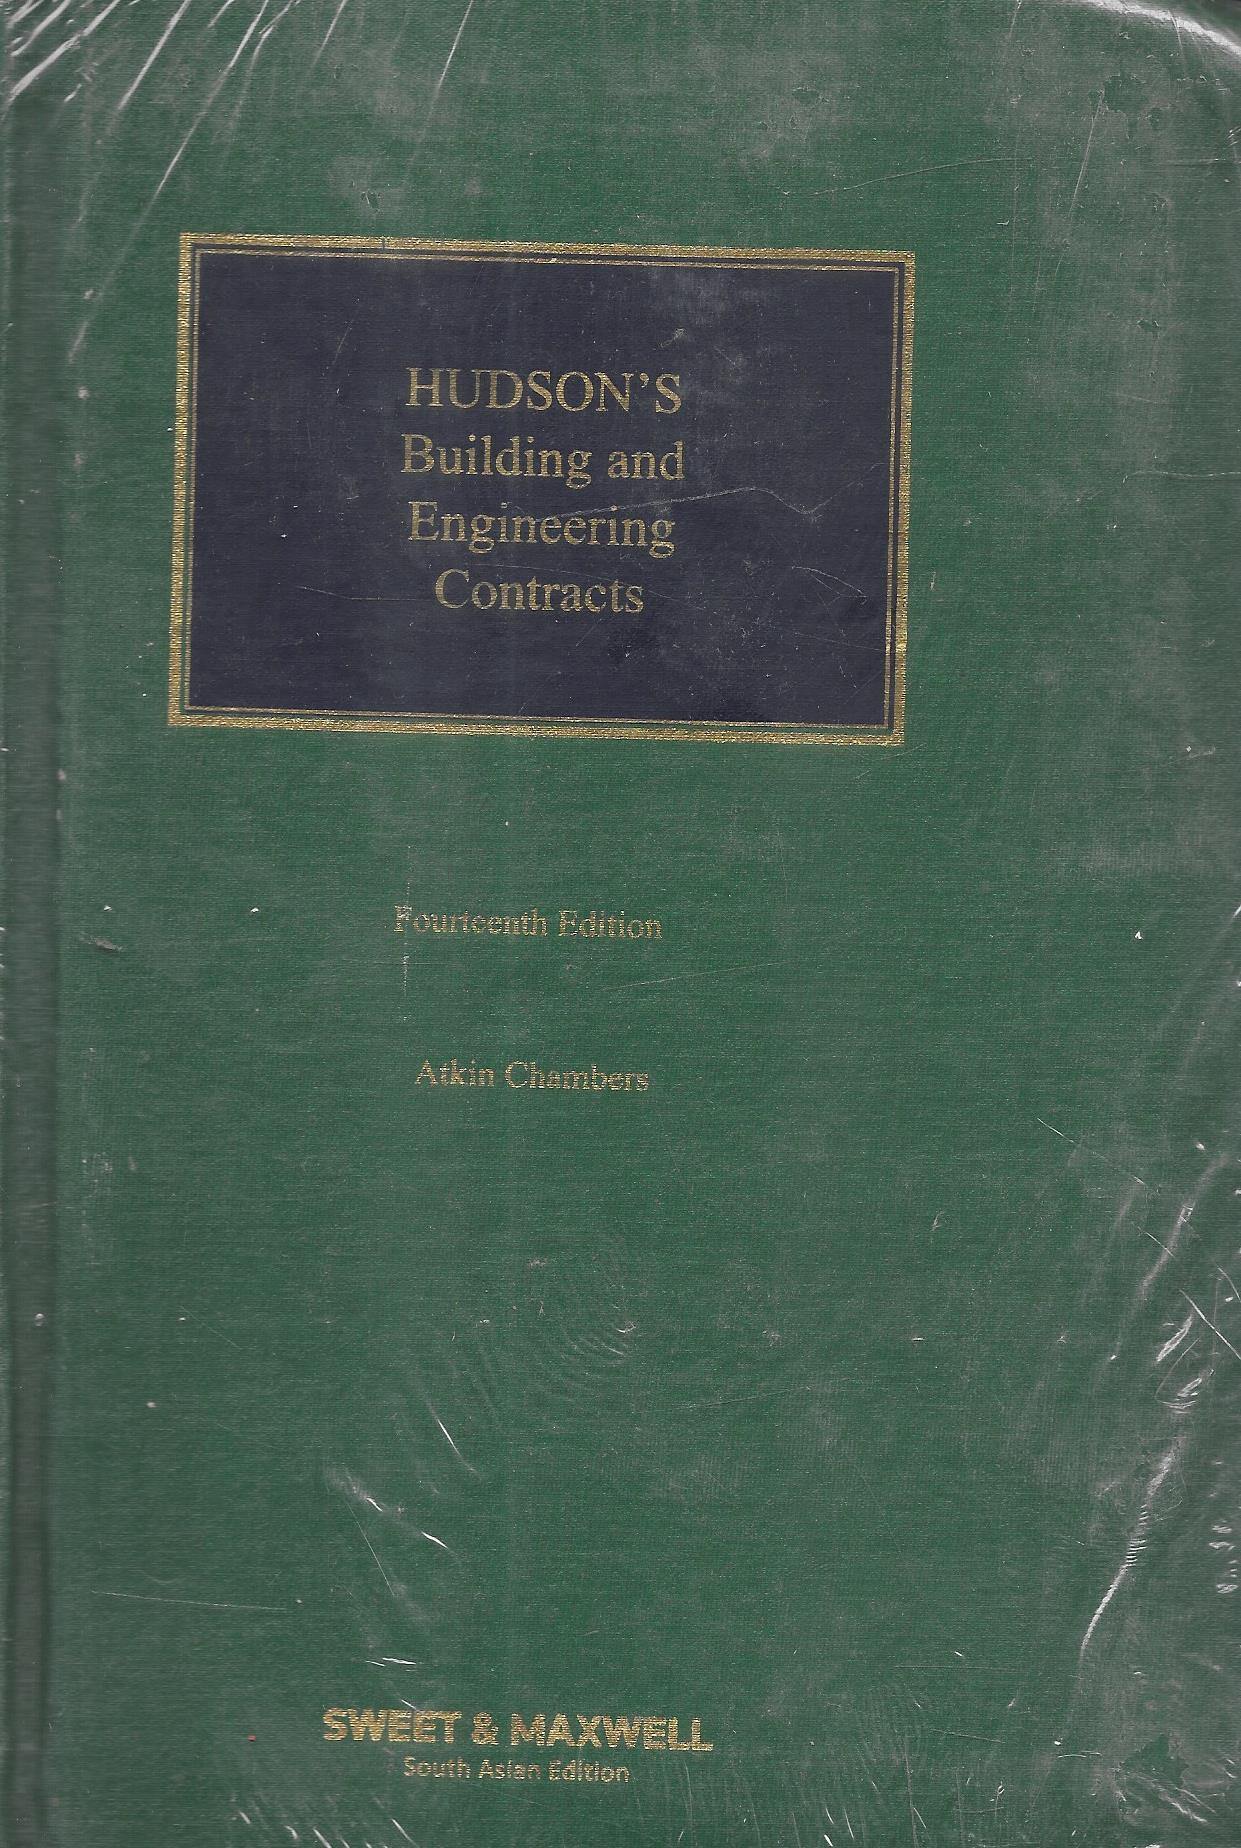 Hudson's Building Engineering Contracts - M&J Services